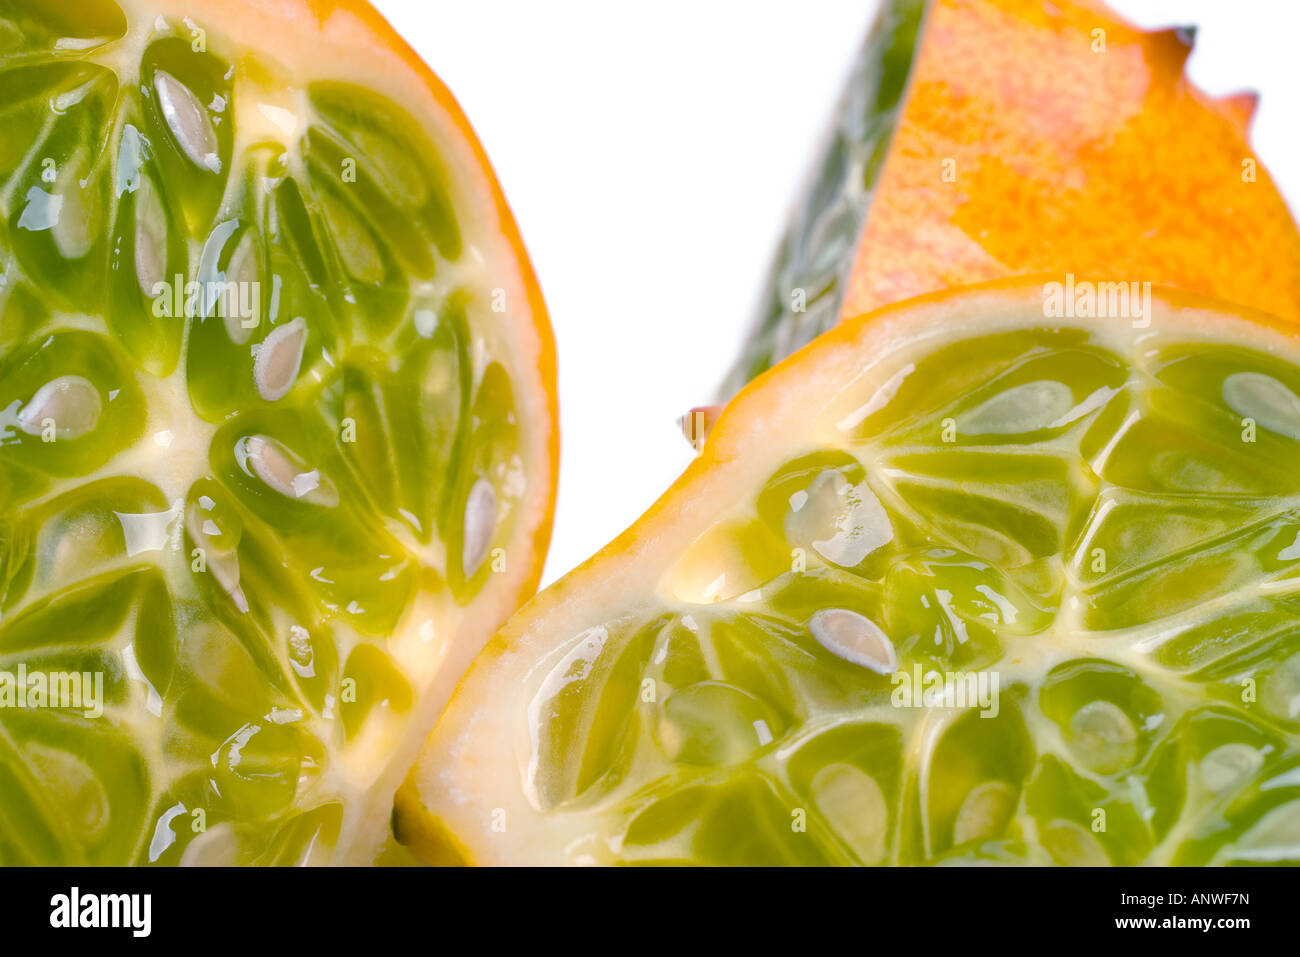 A juicy sliced open horned or Kiwano melon showing the seeds and yellow green flesh Stock Photo